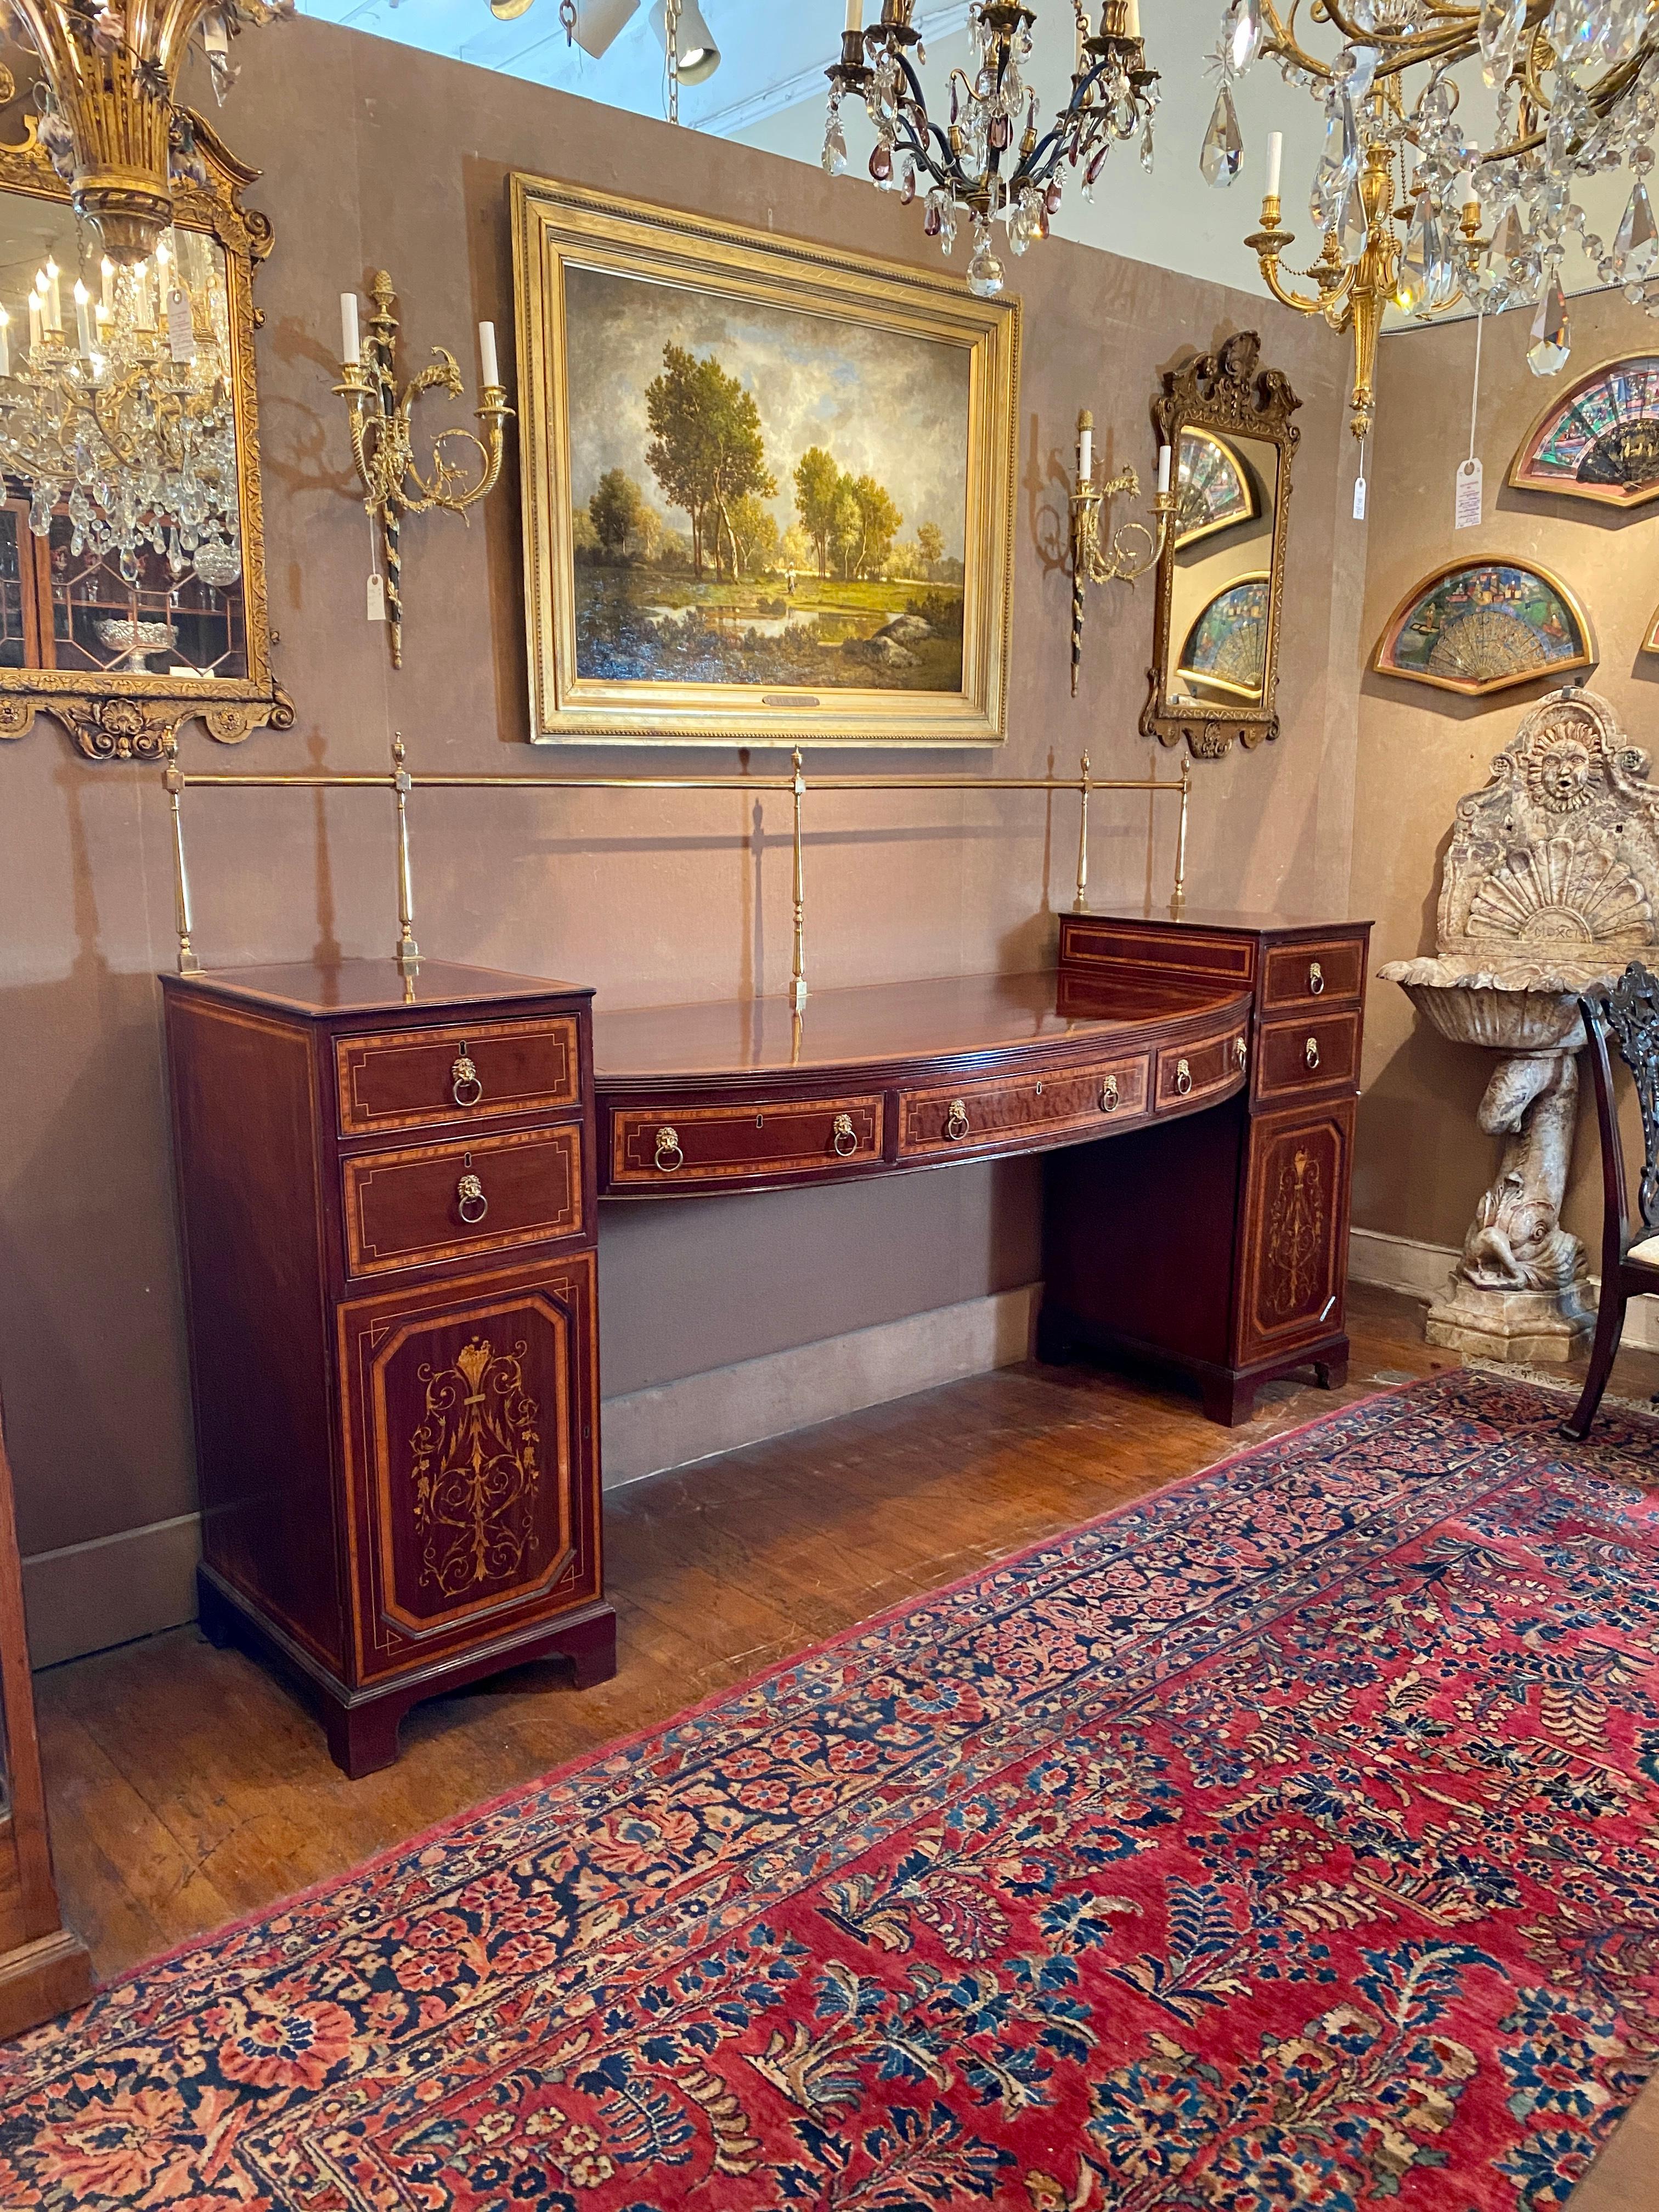 Antique English Sheraton Inlaid Mahogany Sideboard With Brass Rail, Circa 1870's For Sale 2